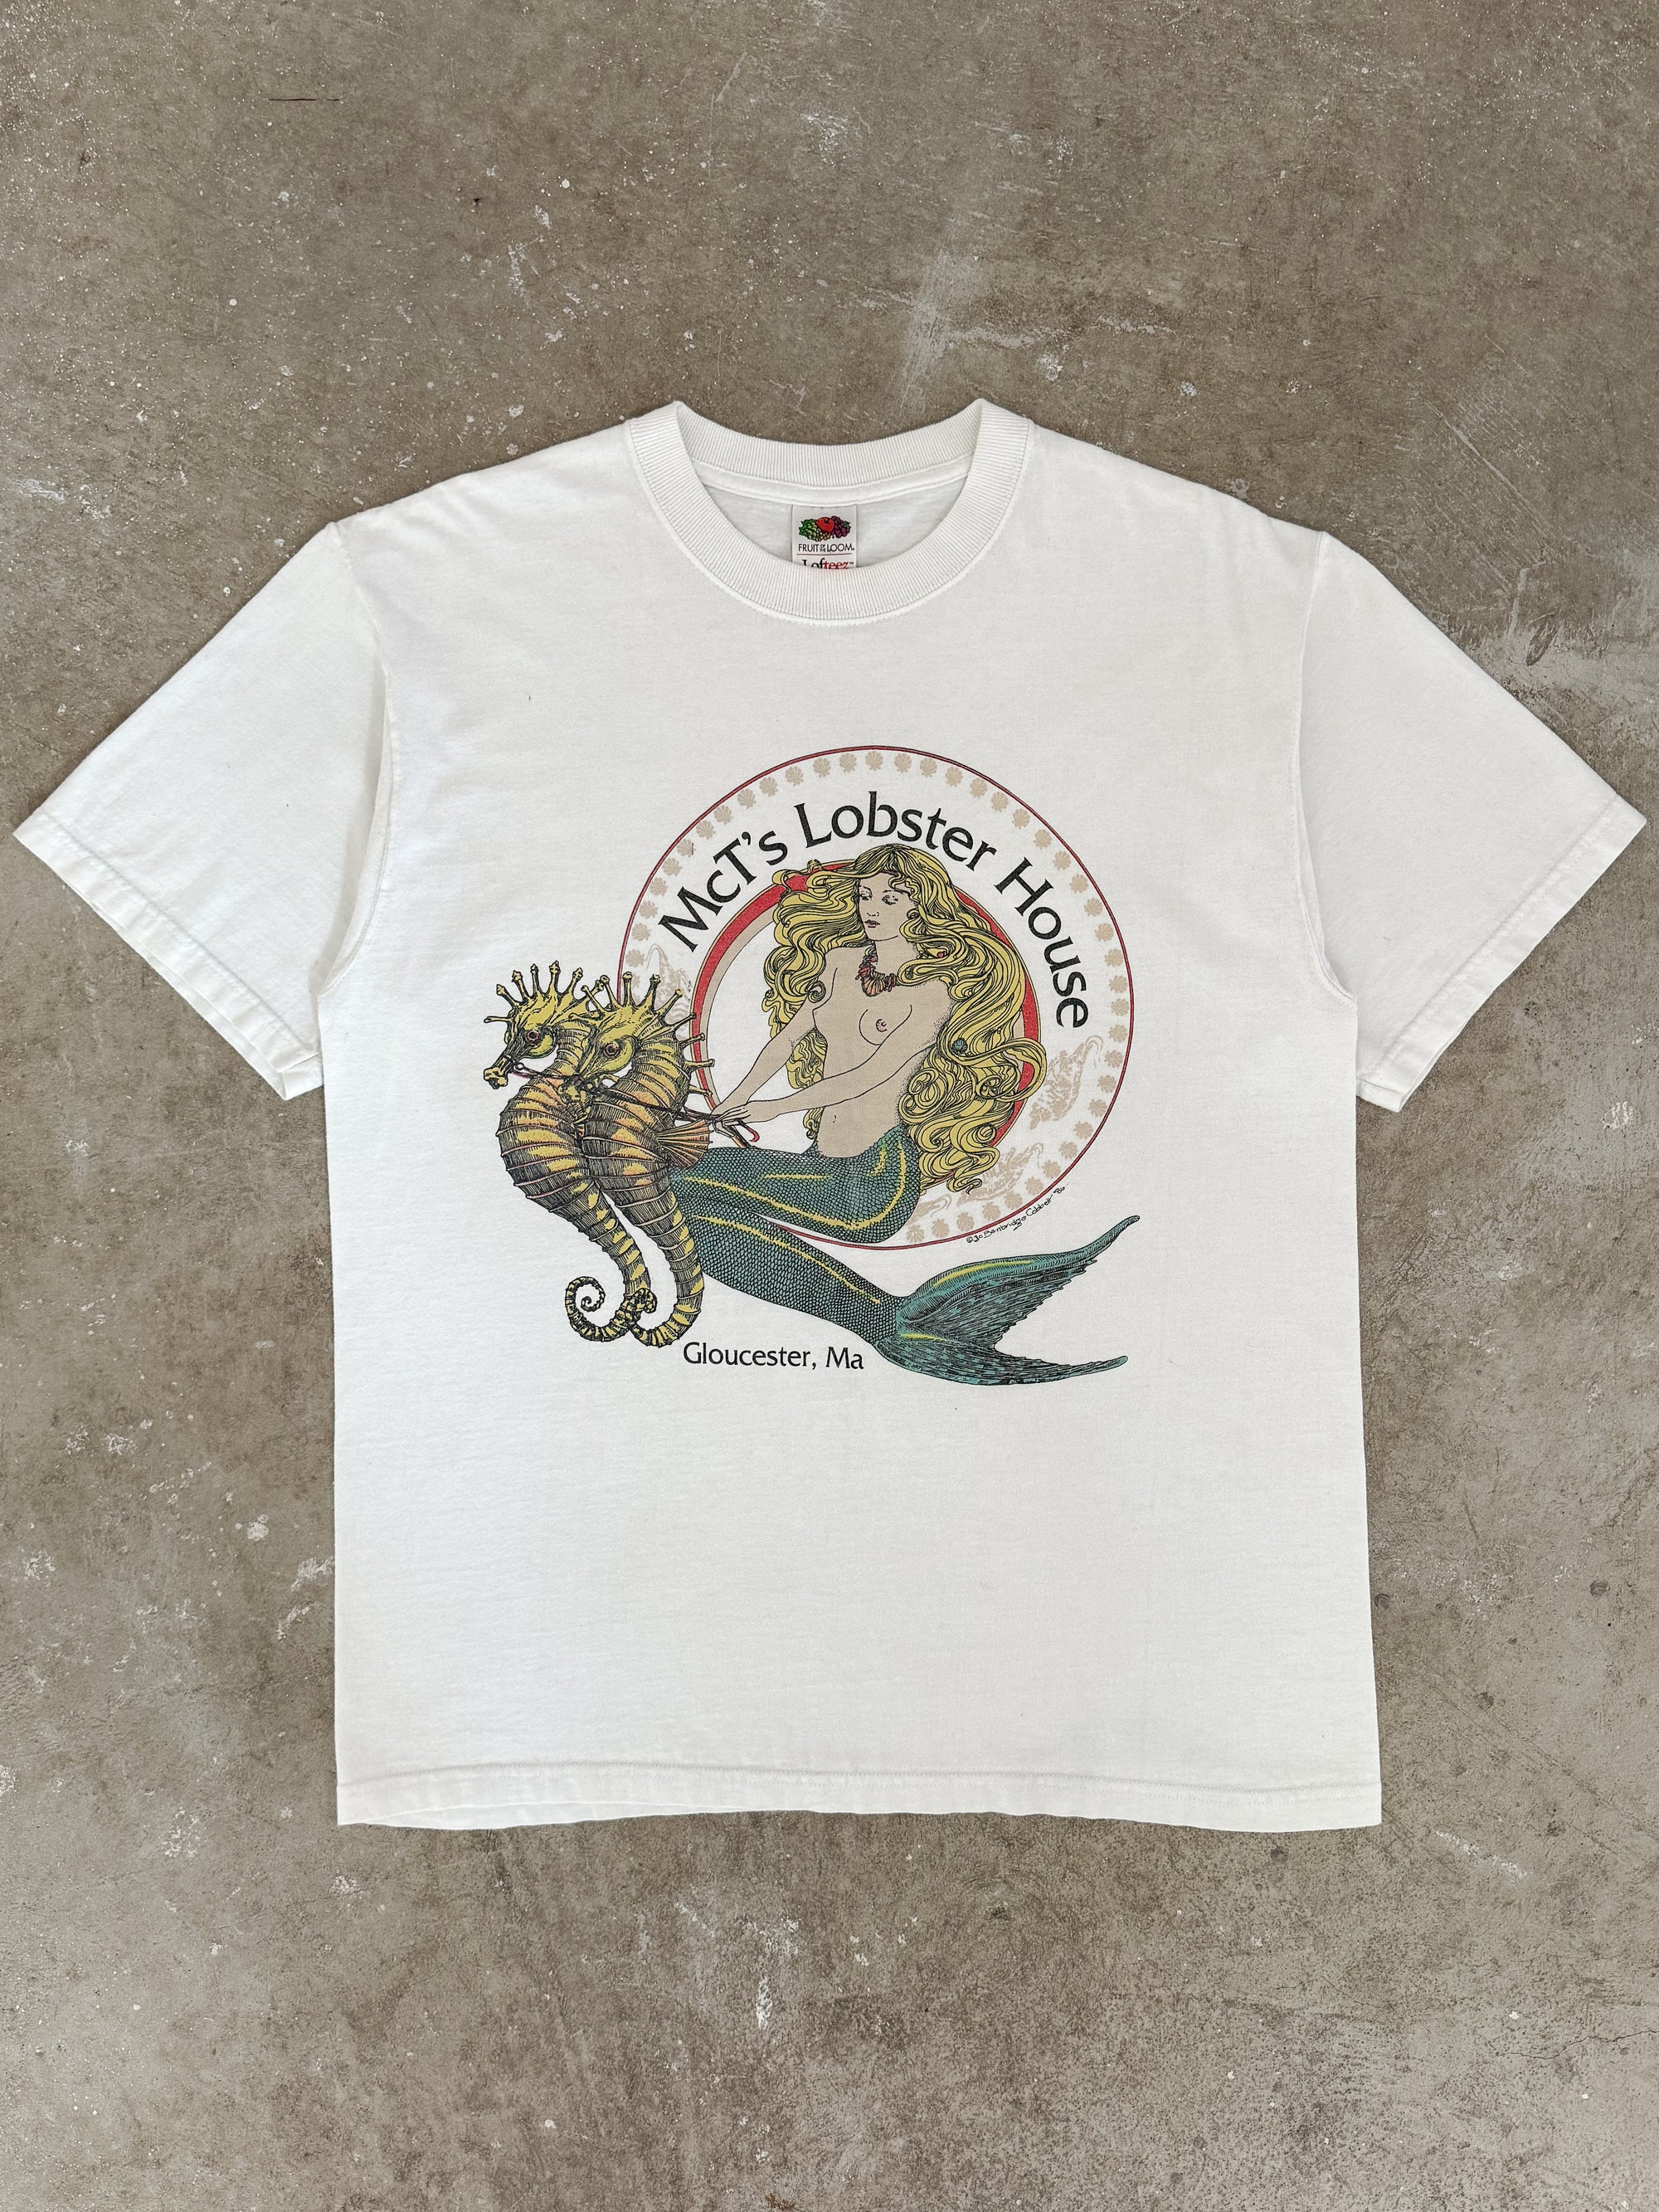 2000s "Lobster House" Tee (M)